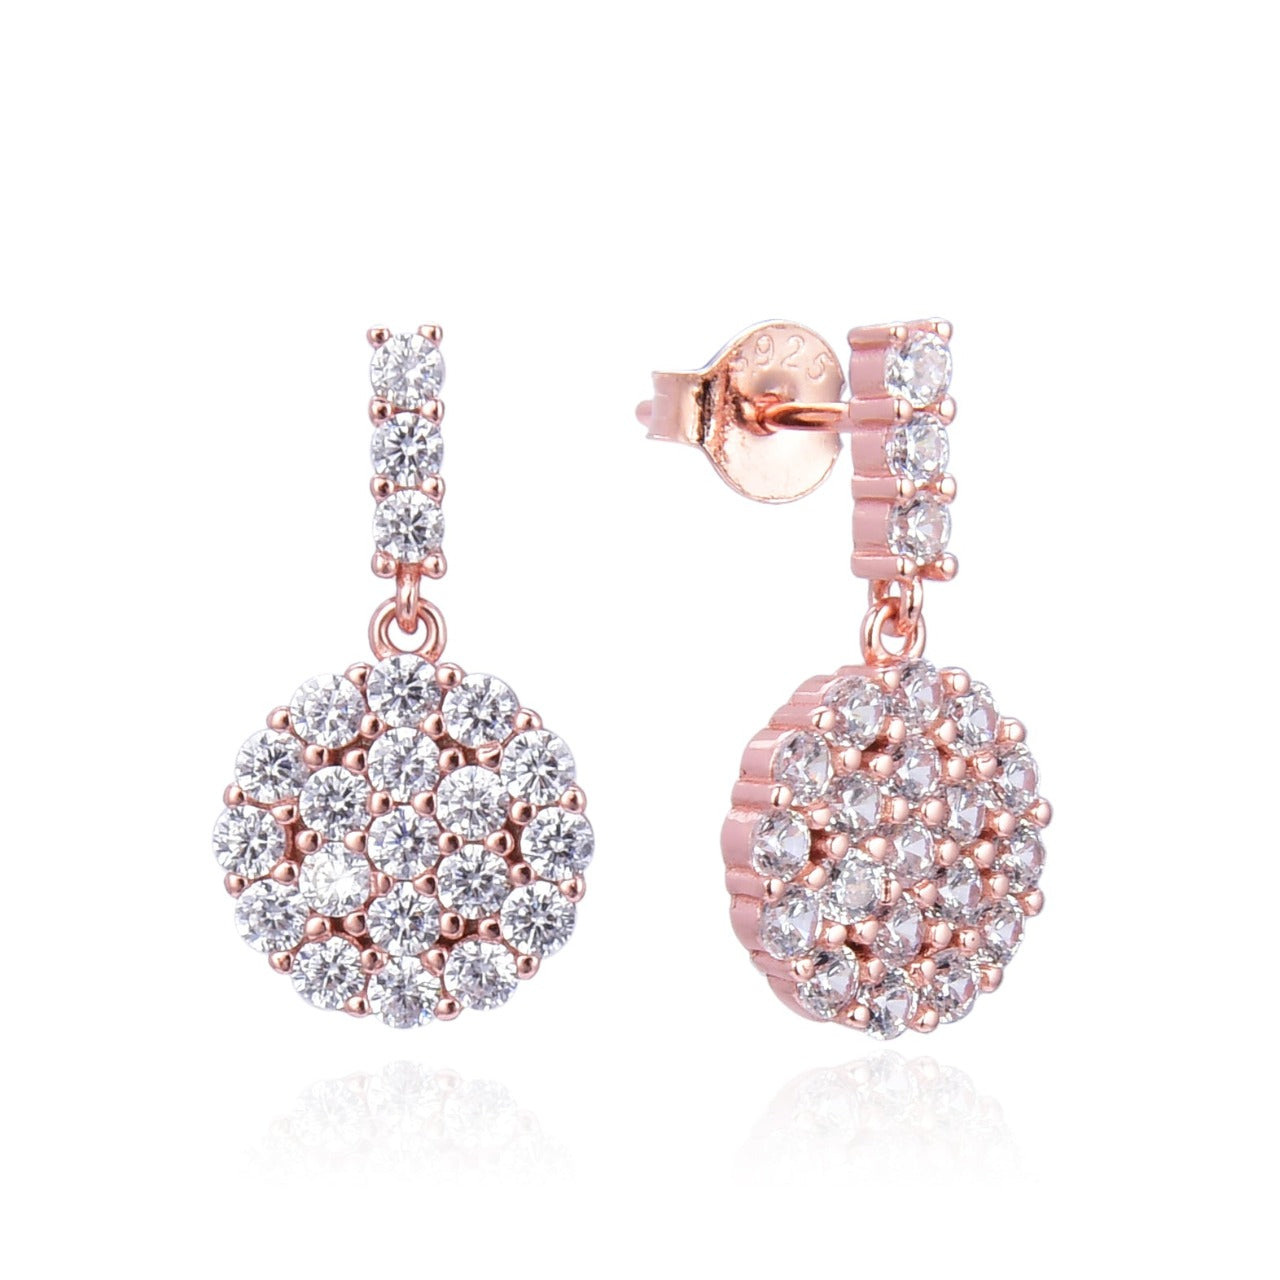 Kilkenny Silver Rose Gold Beauty Drop Earrings  Rose gold plated sterling silver eye catching drop earrings with cubic zirconia stones. Gives you that extra sparkle.